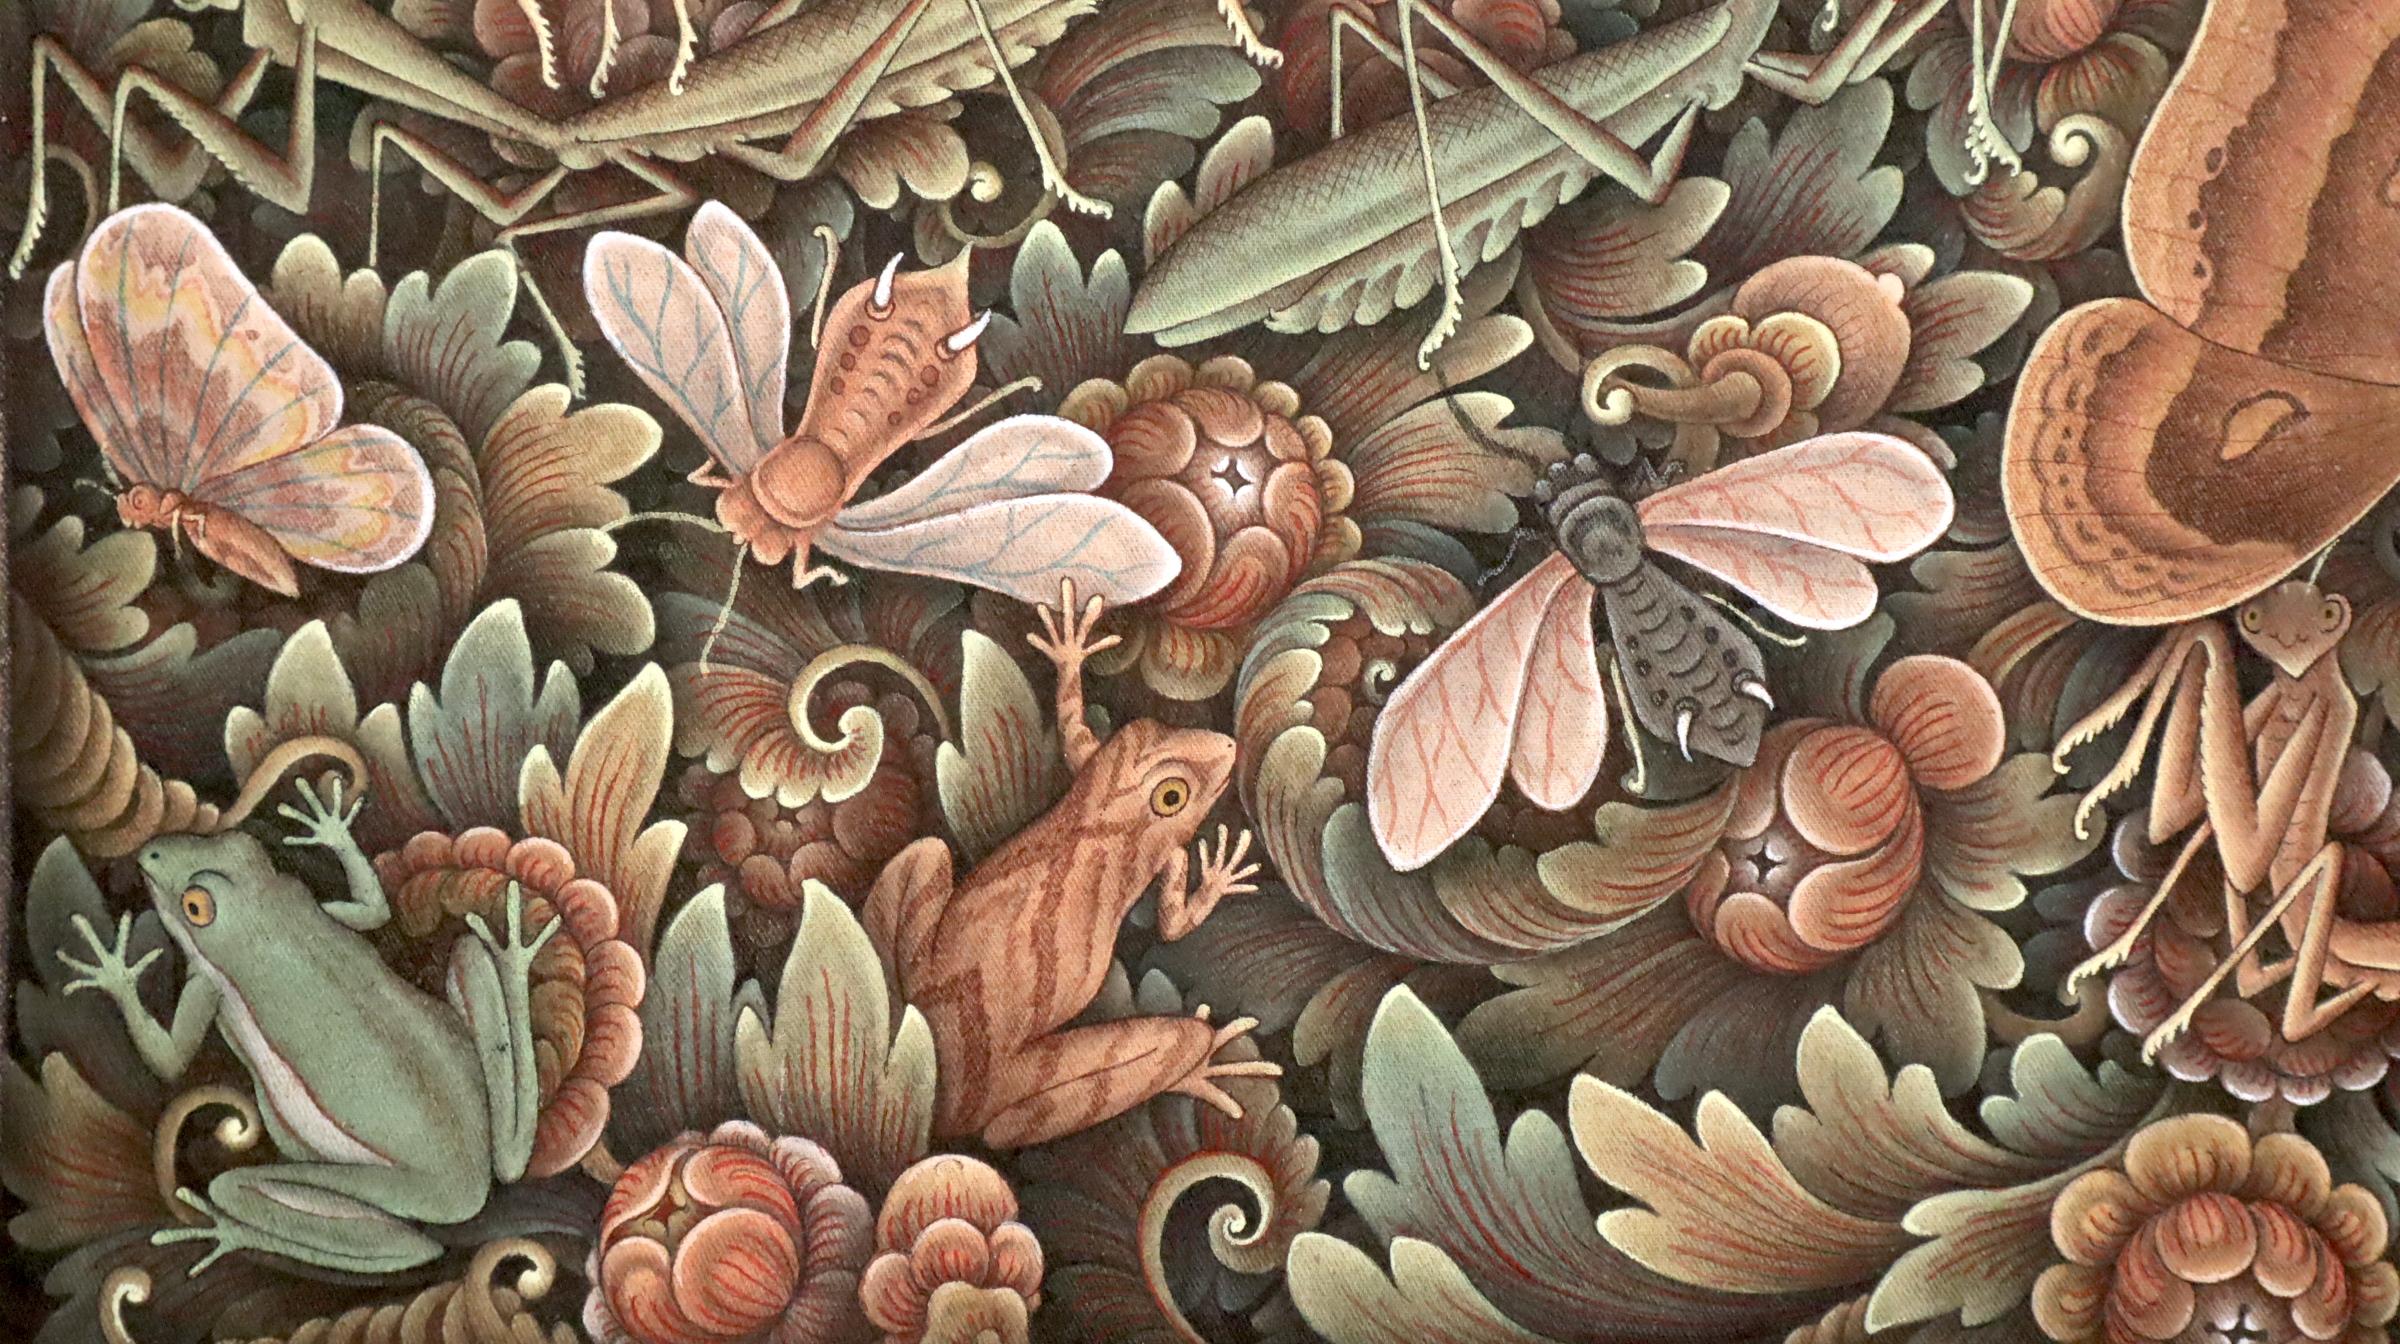 Balinese painting of the insect world Indonesian art from Peliatan Ubud Bali - Brown Still-Life Painting by Nyoman Dayuh